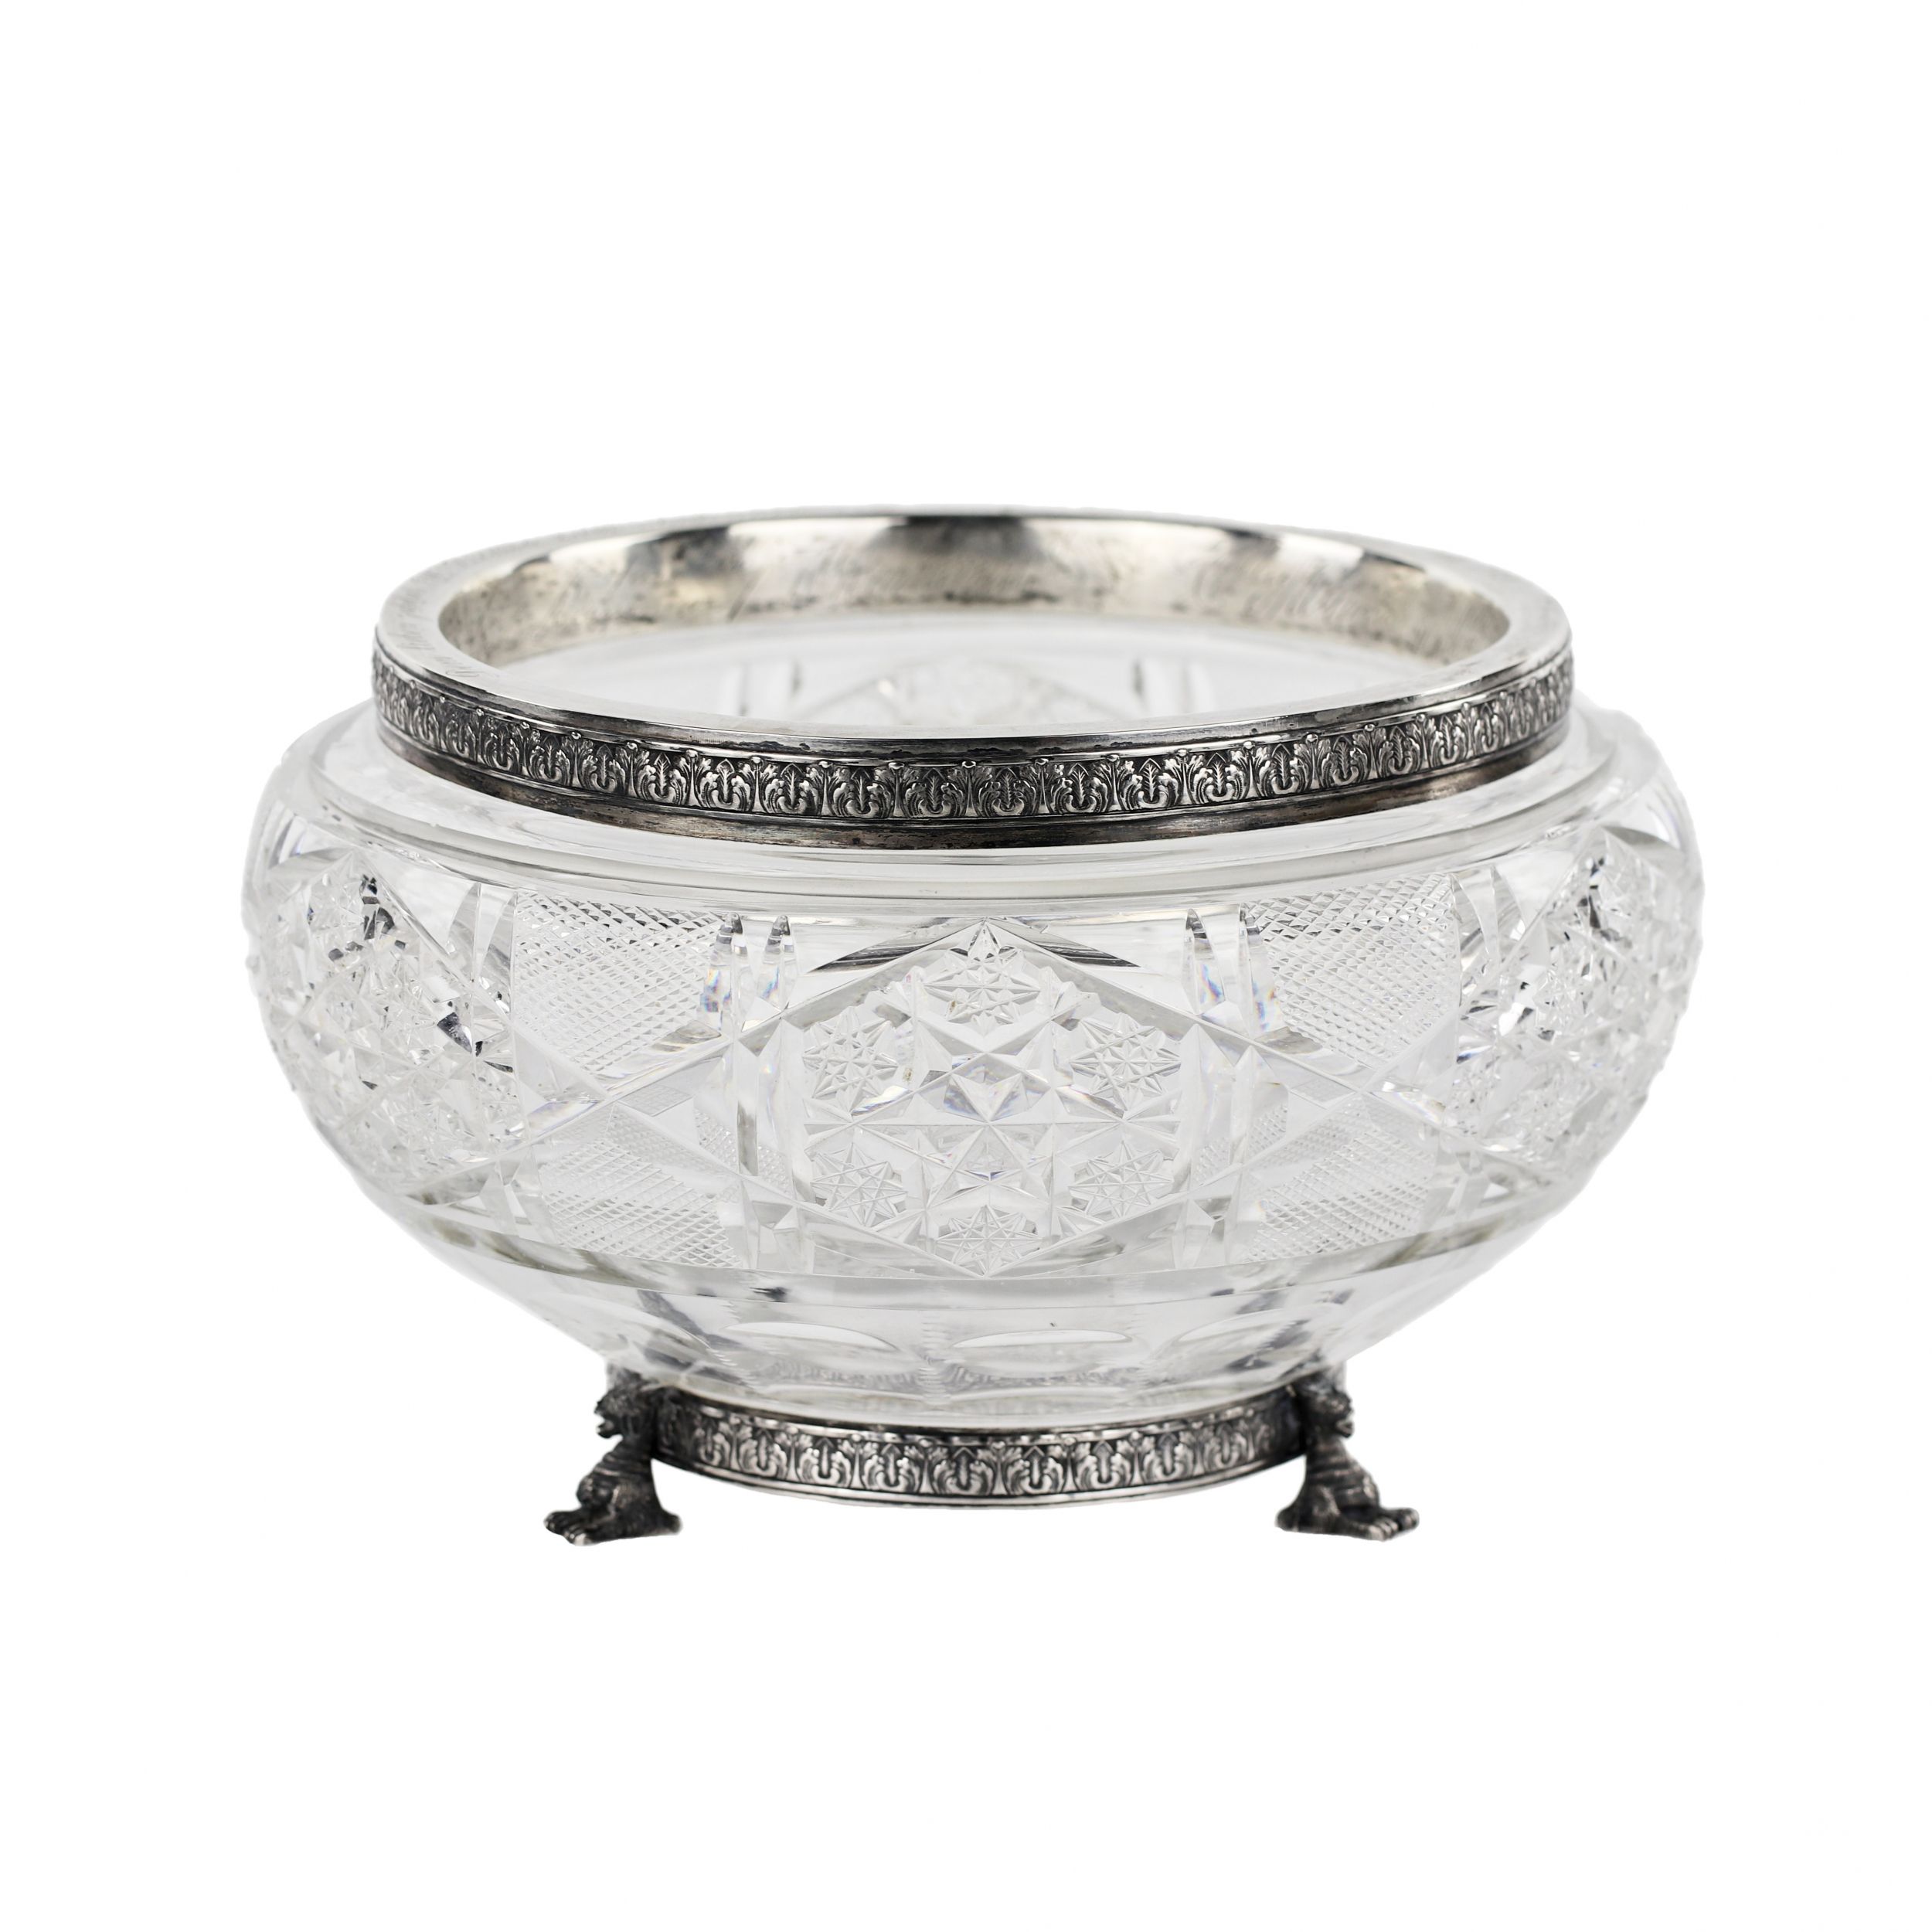 Heavy-crystal-candy-bowl-in-silver-Russian-work-at-the-turn-of-the-19th-20th-centuries-